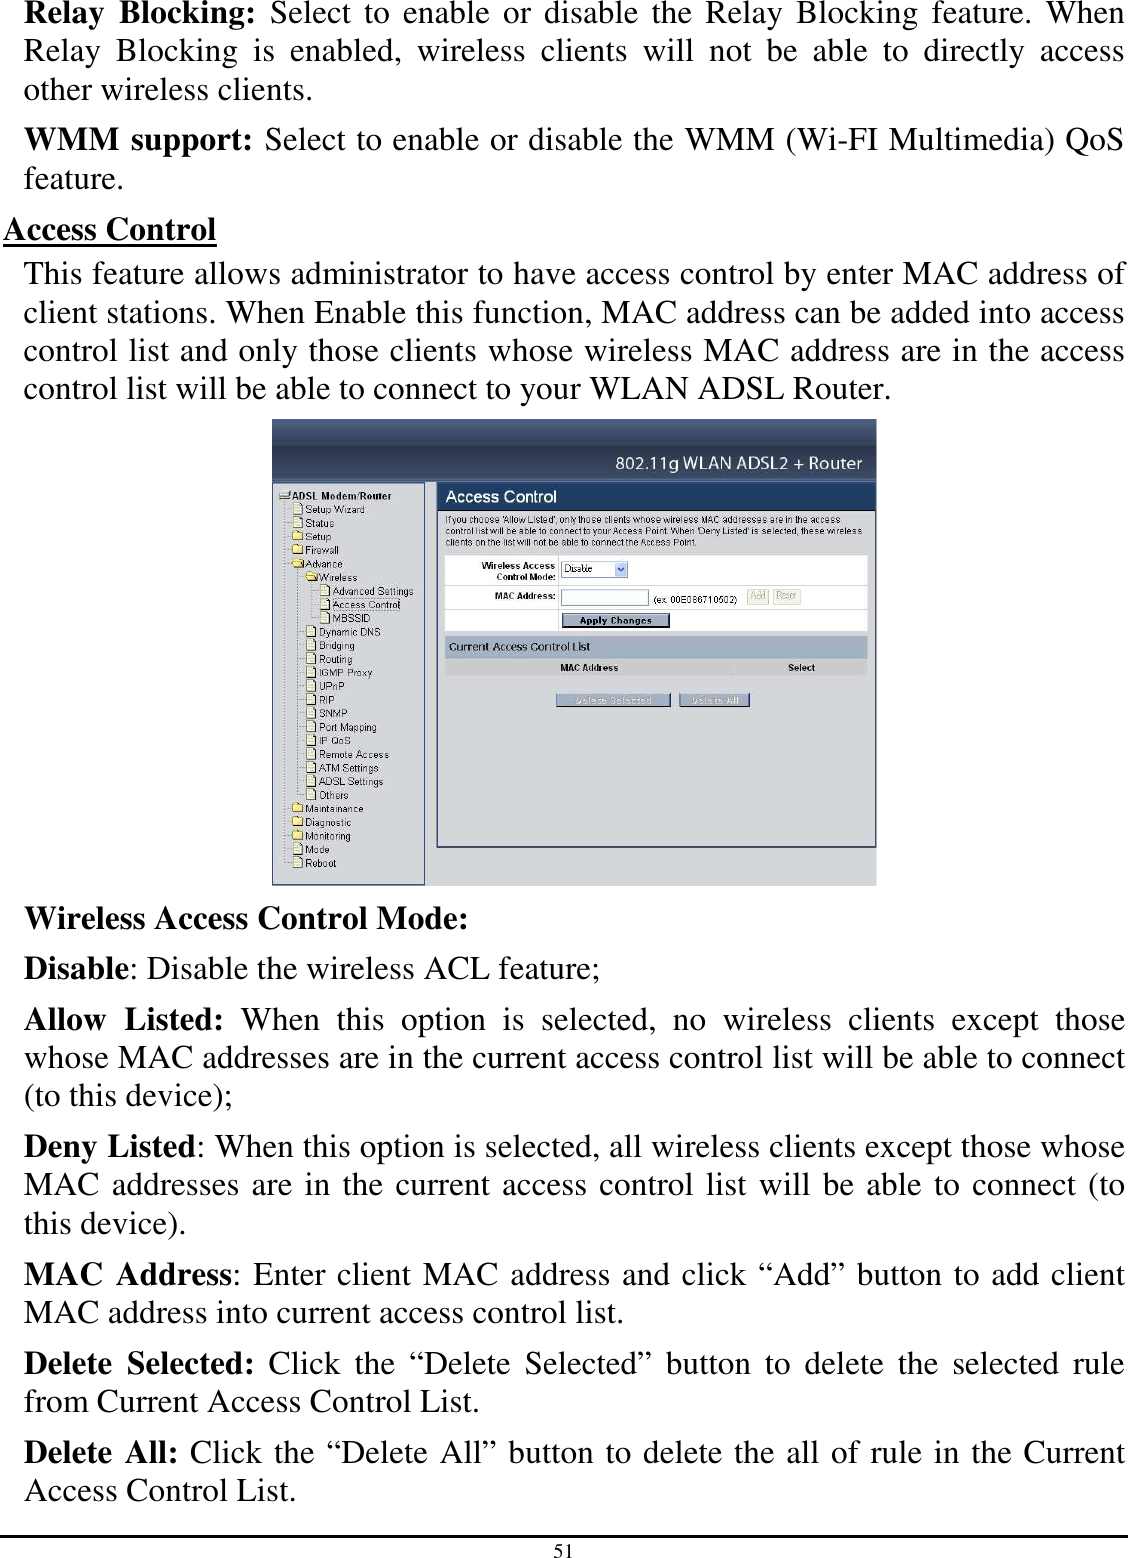 51 Relay  Blocking:  Select to enable or disable the Relay Blocking feature. When Relay  Blocking  is  enabled,  wireless  clients  will  not  be  able  to  directly  access other wireless clients. WMM support: Select to enable or disable the WMM (Wi-FI Multimedia) QoS feature. Access Control This feature allows administrator to have access control by enter MAC address of client stations. When Enable this function, MAC address can be added into access control list and only those clients whose wireless MAC address are in the access control list will be able to connect to your WLAN ADSL Router.  Wireless Access Control Mode:  Disable: Disable the wireless ACL feature;  Allow  Listed:  When  this  option  is  selected,  no  wireless  clients  except  those whose MAC addresses are in the current access control list will be able to connect (to this device);  Deny Listed: When this option is selected, all wireless clients except those whose MAC addresses are in the current access control list will be able to connect (to this device). MAC Address: Enter client MAC address and click “Add” button to add client MAC address into current access control list. Delete  Selected:  Click  the  “Delete  Selected”  button  to  delete  the  selected  rule from Current Access Control List. Delete All: Click the “Delete All” button to delete the all of rule in the Current Access Control List. 